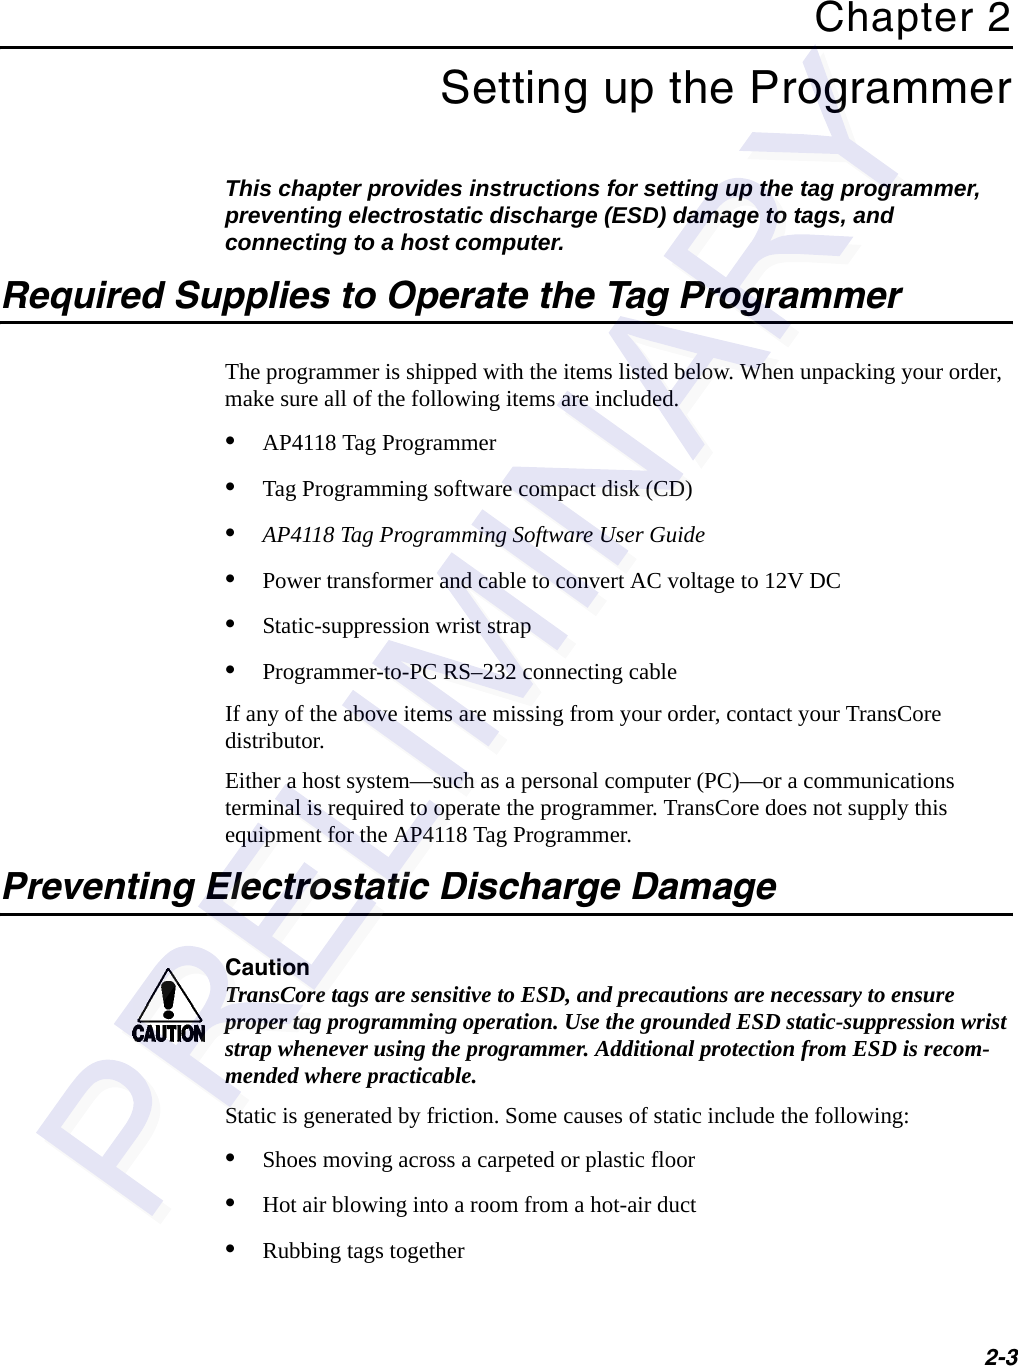 2-3Chapter 2Setting up the ProgrammerThis chapter provides instructions for setting up the tag programmer, preventing electrostatic discharge (ESD) damage to tags, and connecting to a host computer.Required Supplies to Operate the Tag ProgrammerThe programmer is shipped with the items listed below. When unpacking your order, make sure all of the following items are included.•AP4118 Tag Programmer•Tag Programming software compact disk (CD)•AP4118 Tag Programming Software User Guide•Power transformer and cable to convert AC voltage to 12V DC•Static-suppression wrist strap•Programmer-to-PC RS–232 connecting cableIf any of the above items are missing from your order, contact your TransCore distributor.Either a host system—such as a personal computer (PC)—or a communications terminal is required to operate the programmer. TransCore does not supply this equipment for the AP4118 Tag Programmer.Preventing Electrostatic Discharge DamageCautionTransCore tags are sensitive to ESD, and precautions are necessary to ensure proper tag programming operation. Use the grounded ESD static-suppression wrist strap whenever using the programmer. Additional protection from ESD is recom-mended where practicable.Static is generated by friction. Some causes of static include the following:•Shoes moving across a carpeted or plastic floor•Hot air blowing into a room from a hot-air duct•Rubbing tags together